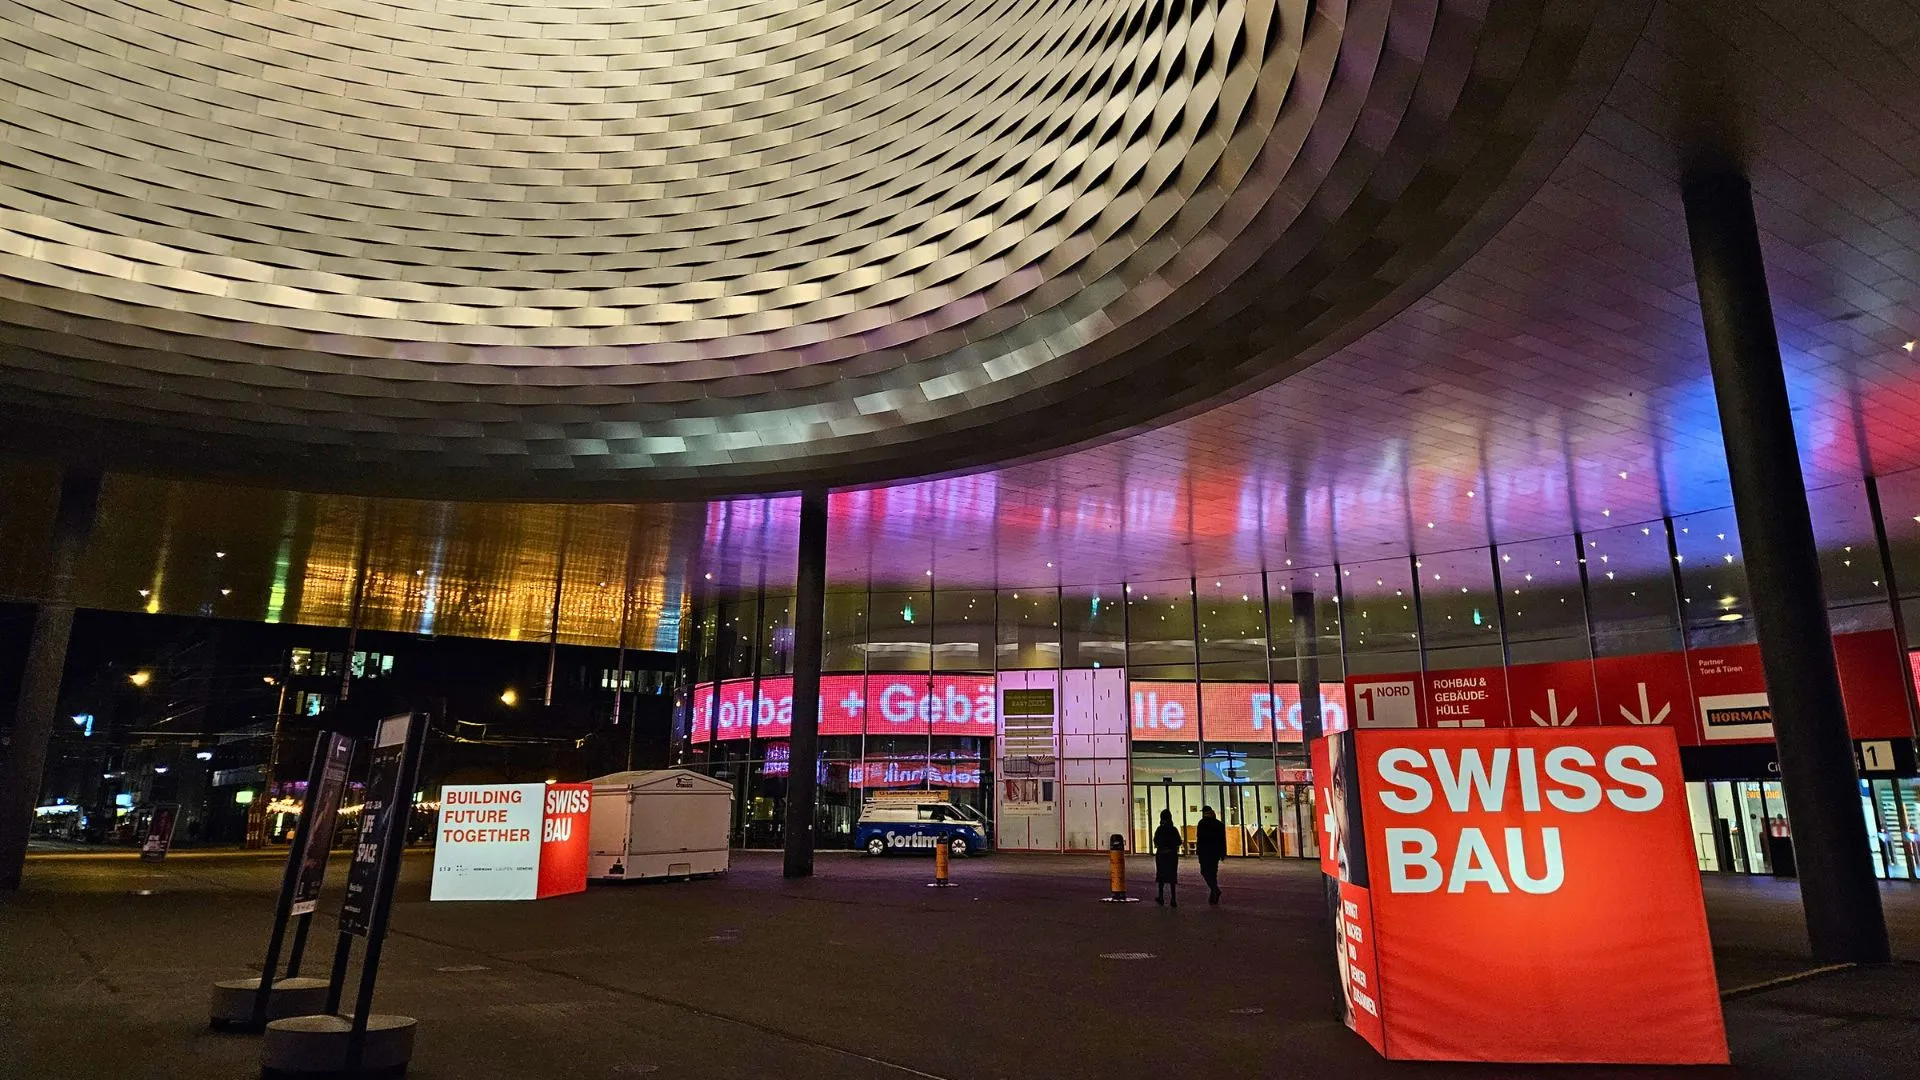 A large red cube with white letters 'SWISSBAU' sits proud at the entrance to the Swissbau 2024 exhibition hall